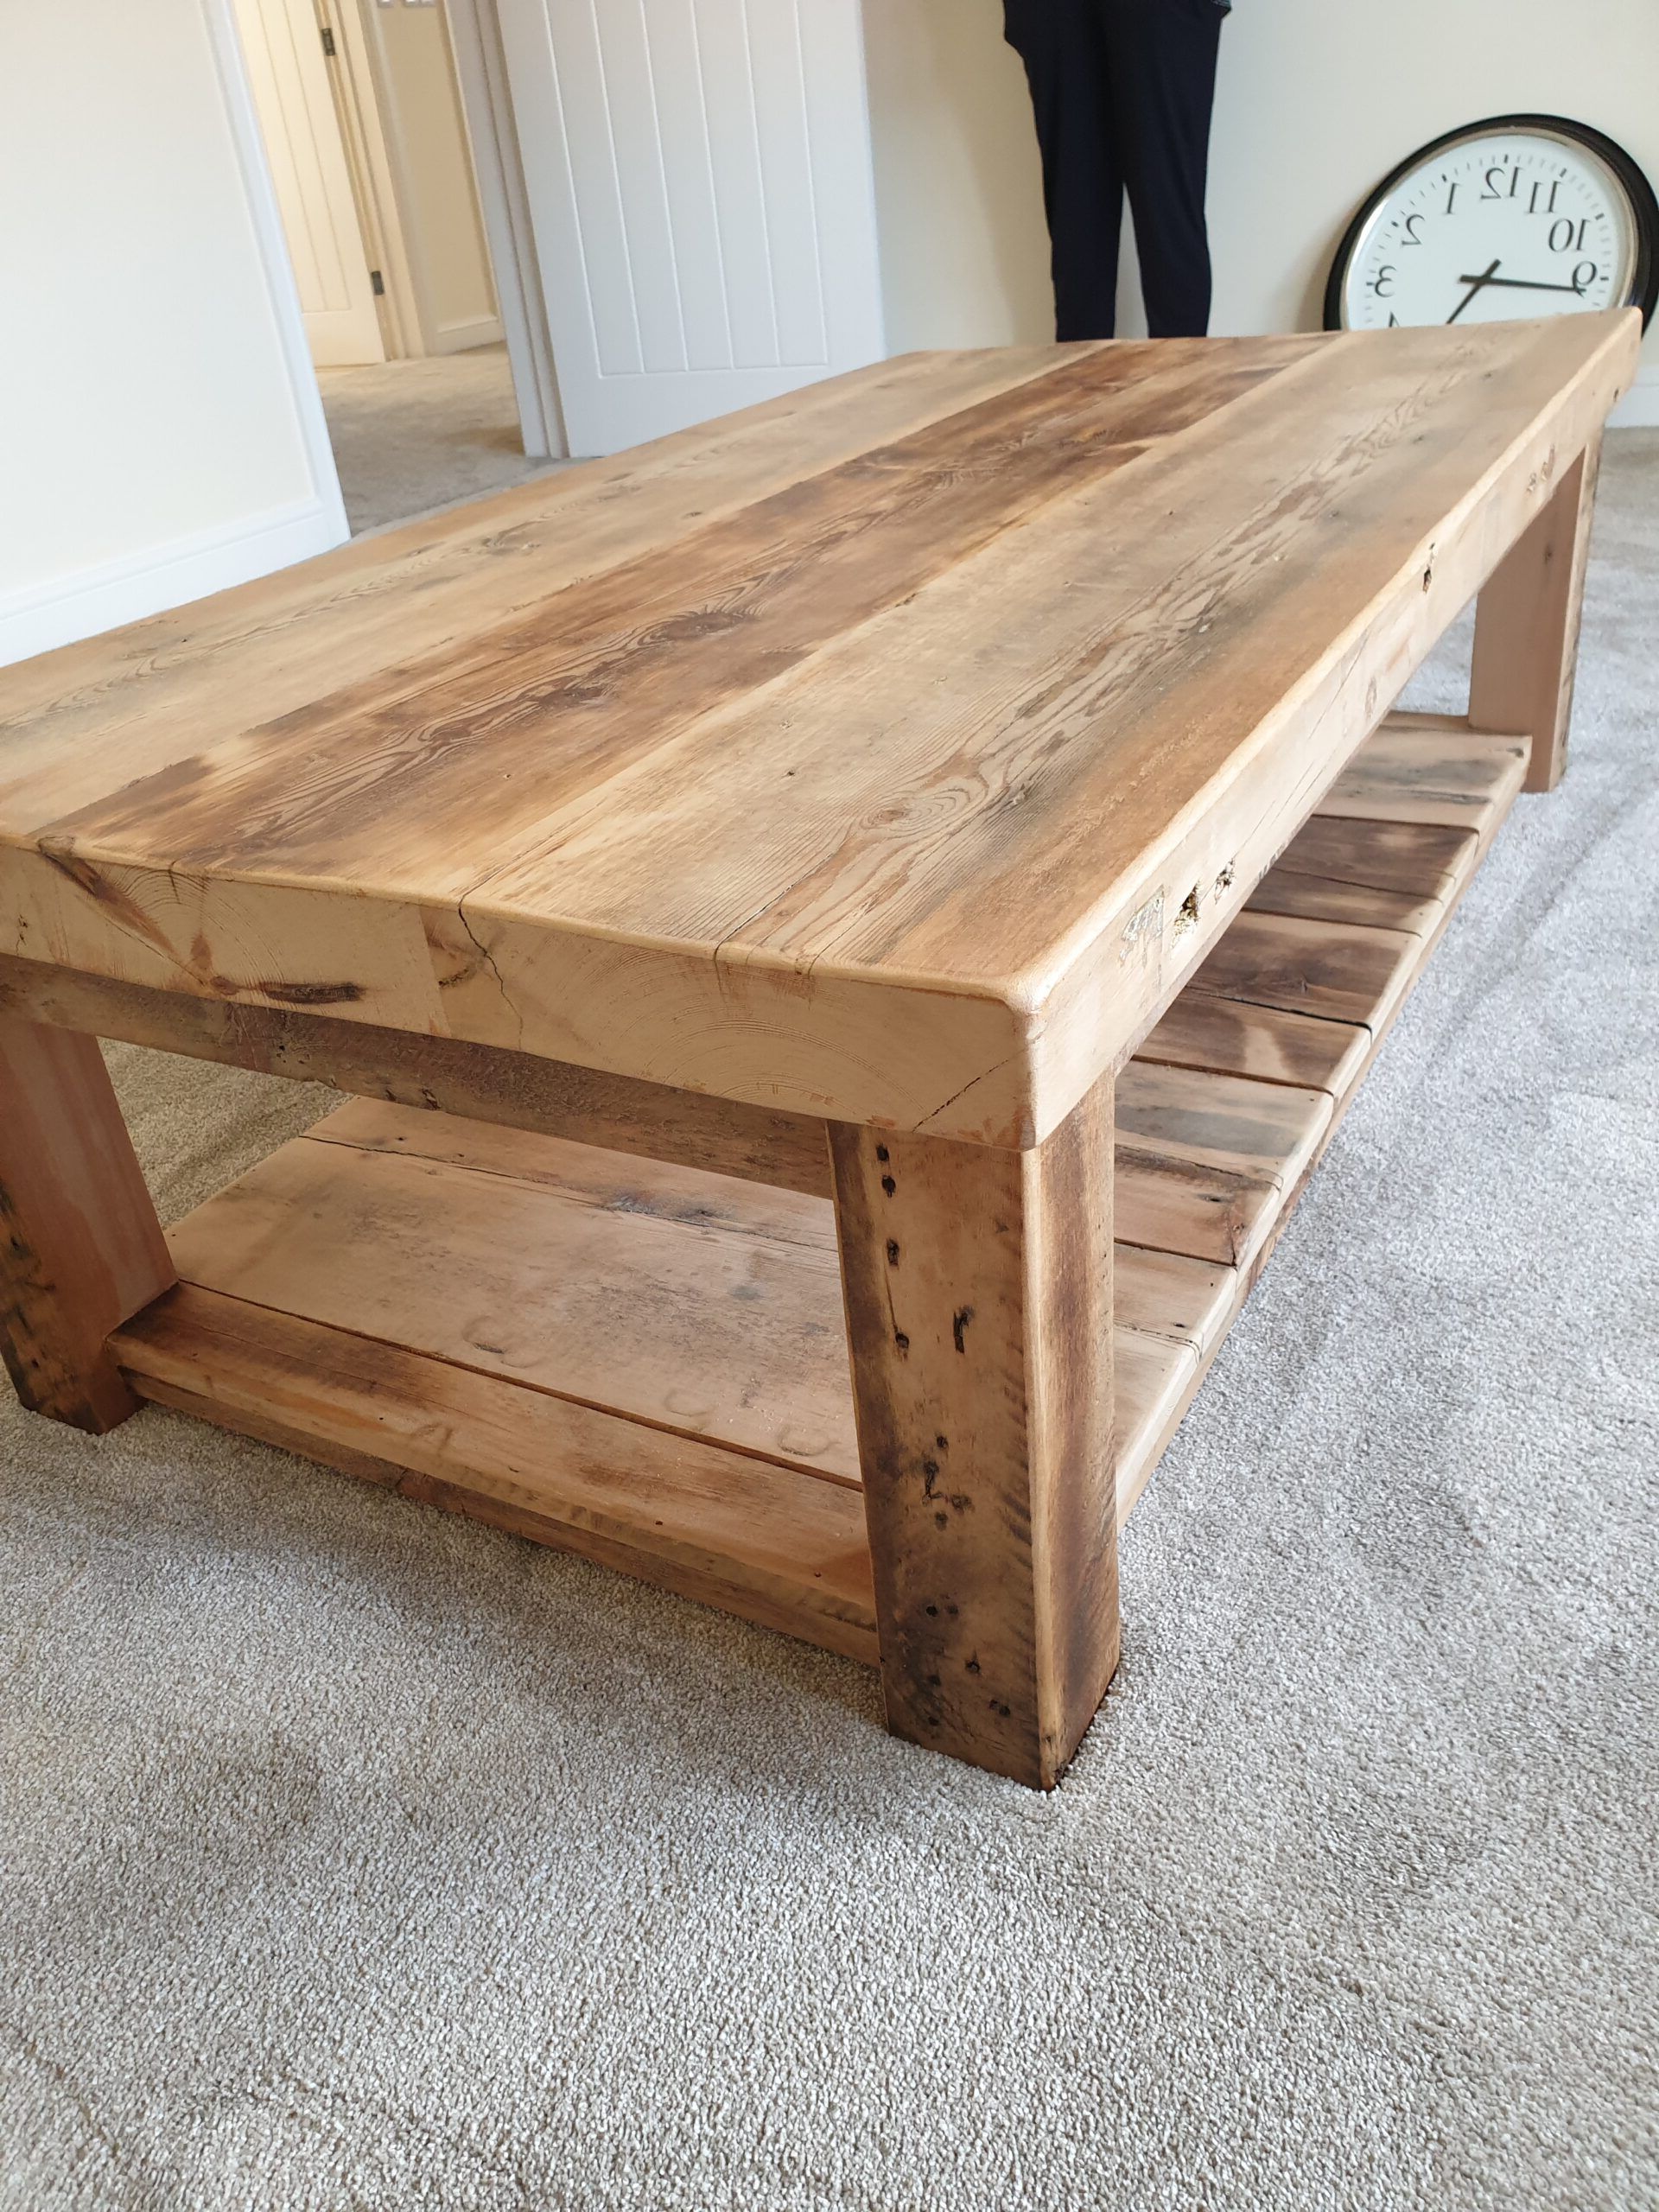 Buy Rustic Wood Coffee Table Made From Reclaimed Timber With Fashionable Rustic Wood Coffee Tables (View 3 of 10)